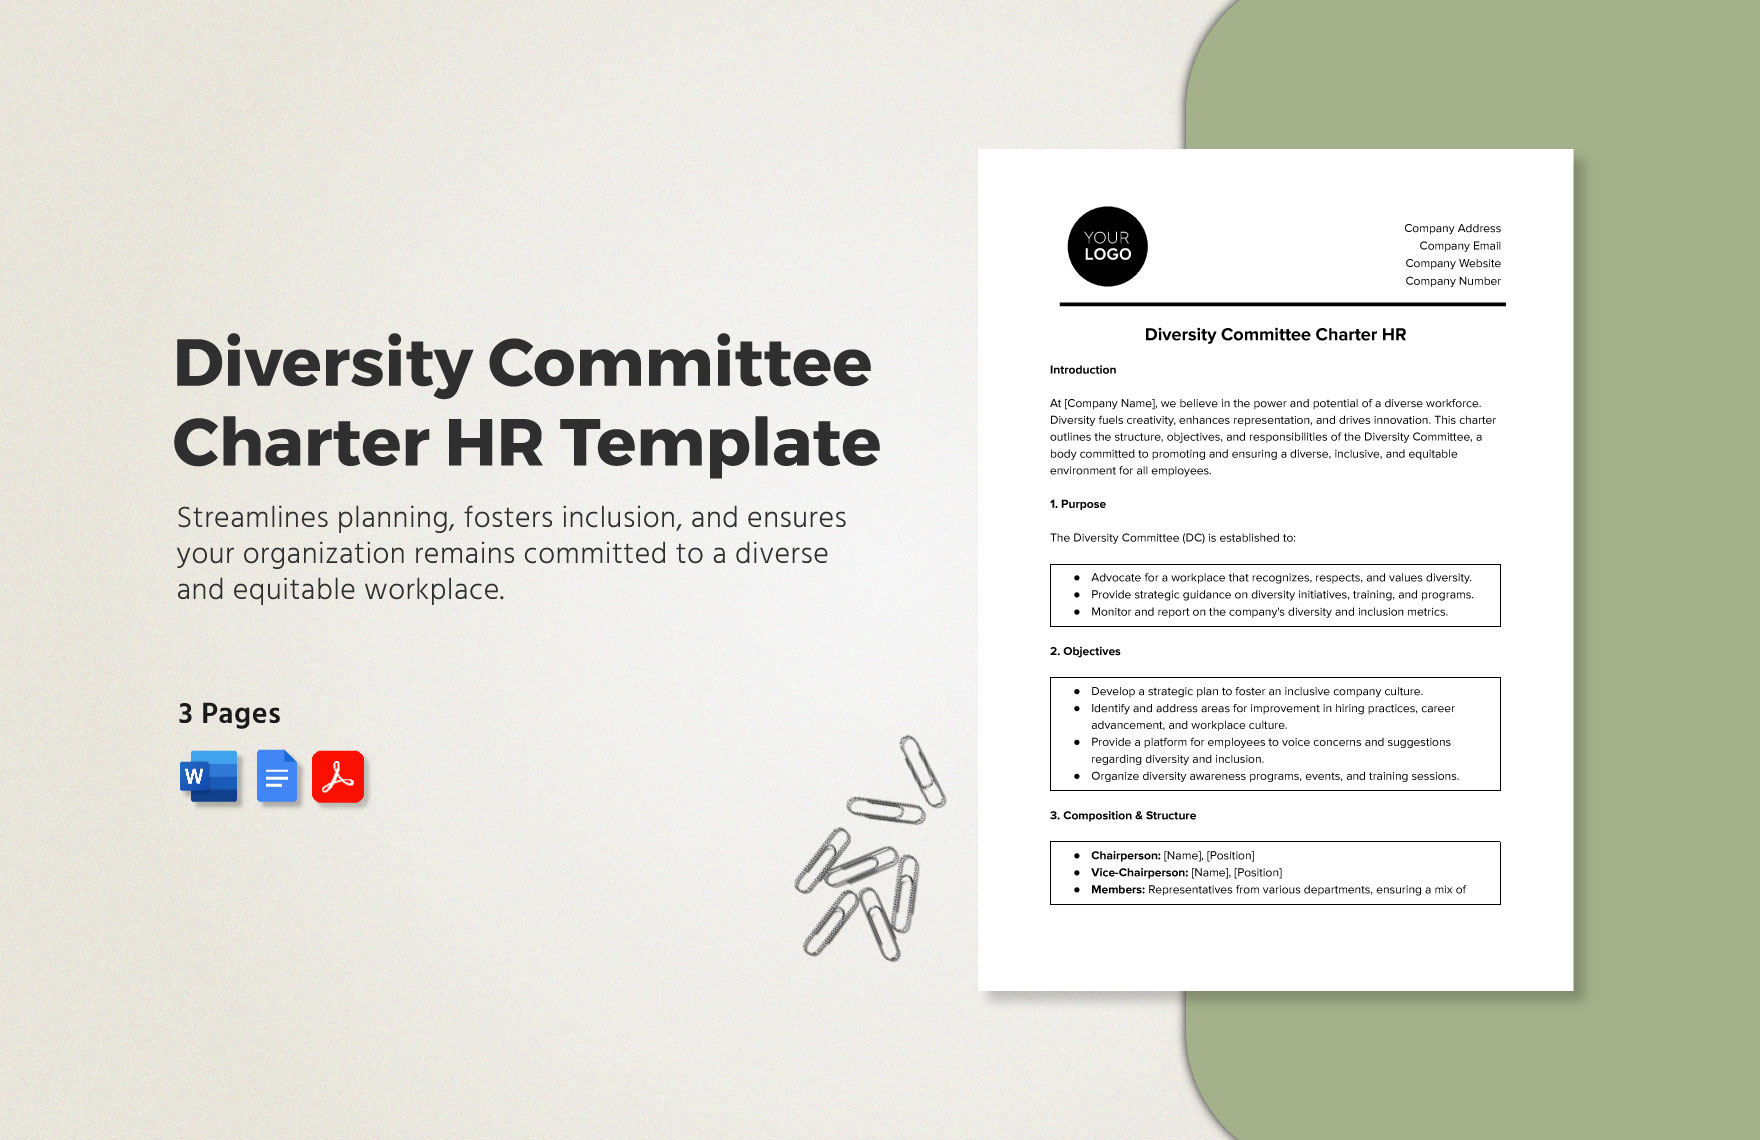 Diversity Committee Charter HR Template in Word, Google Docs, PDF